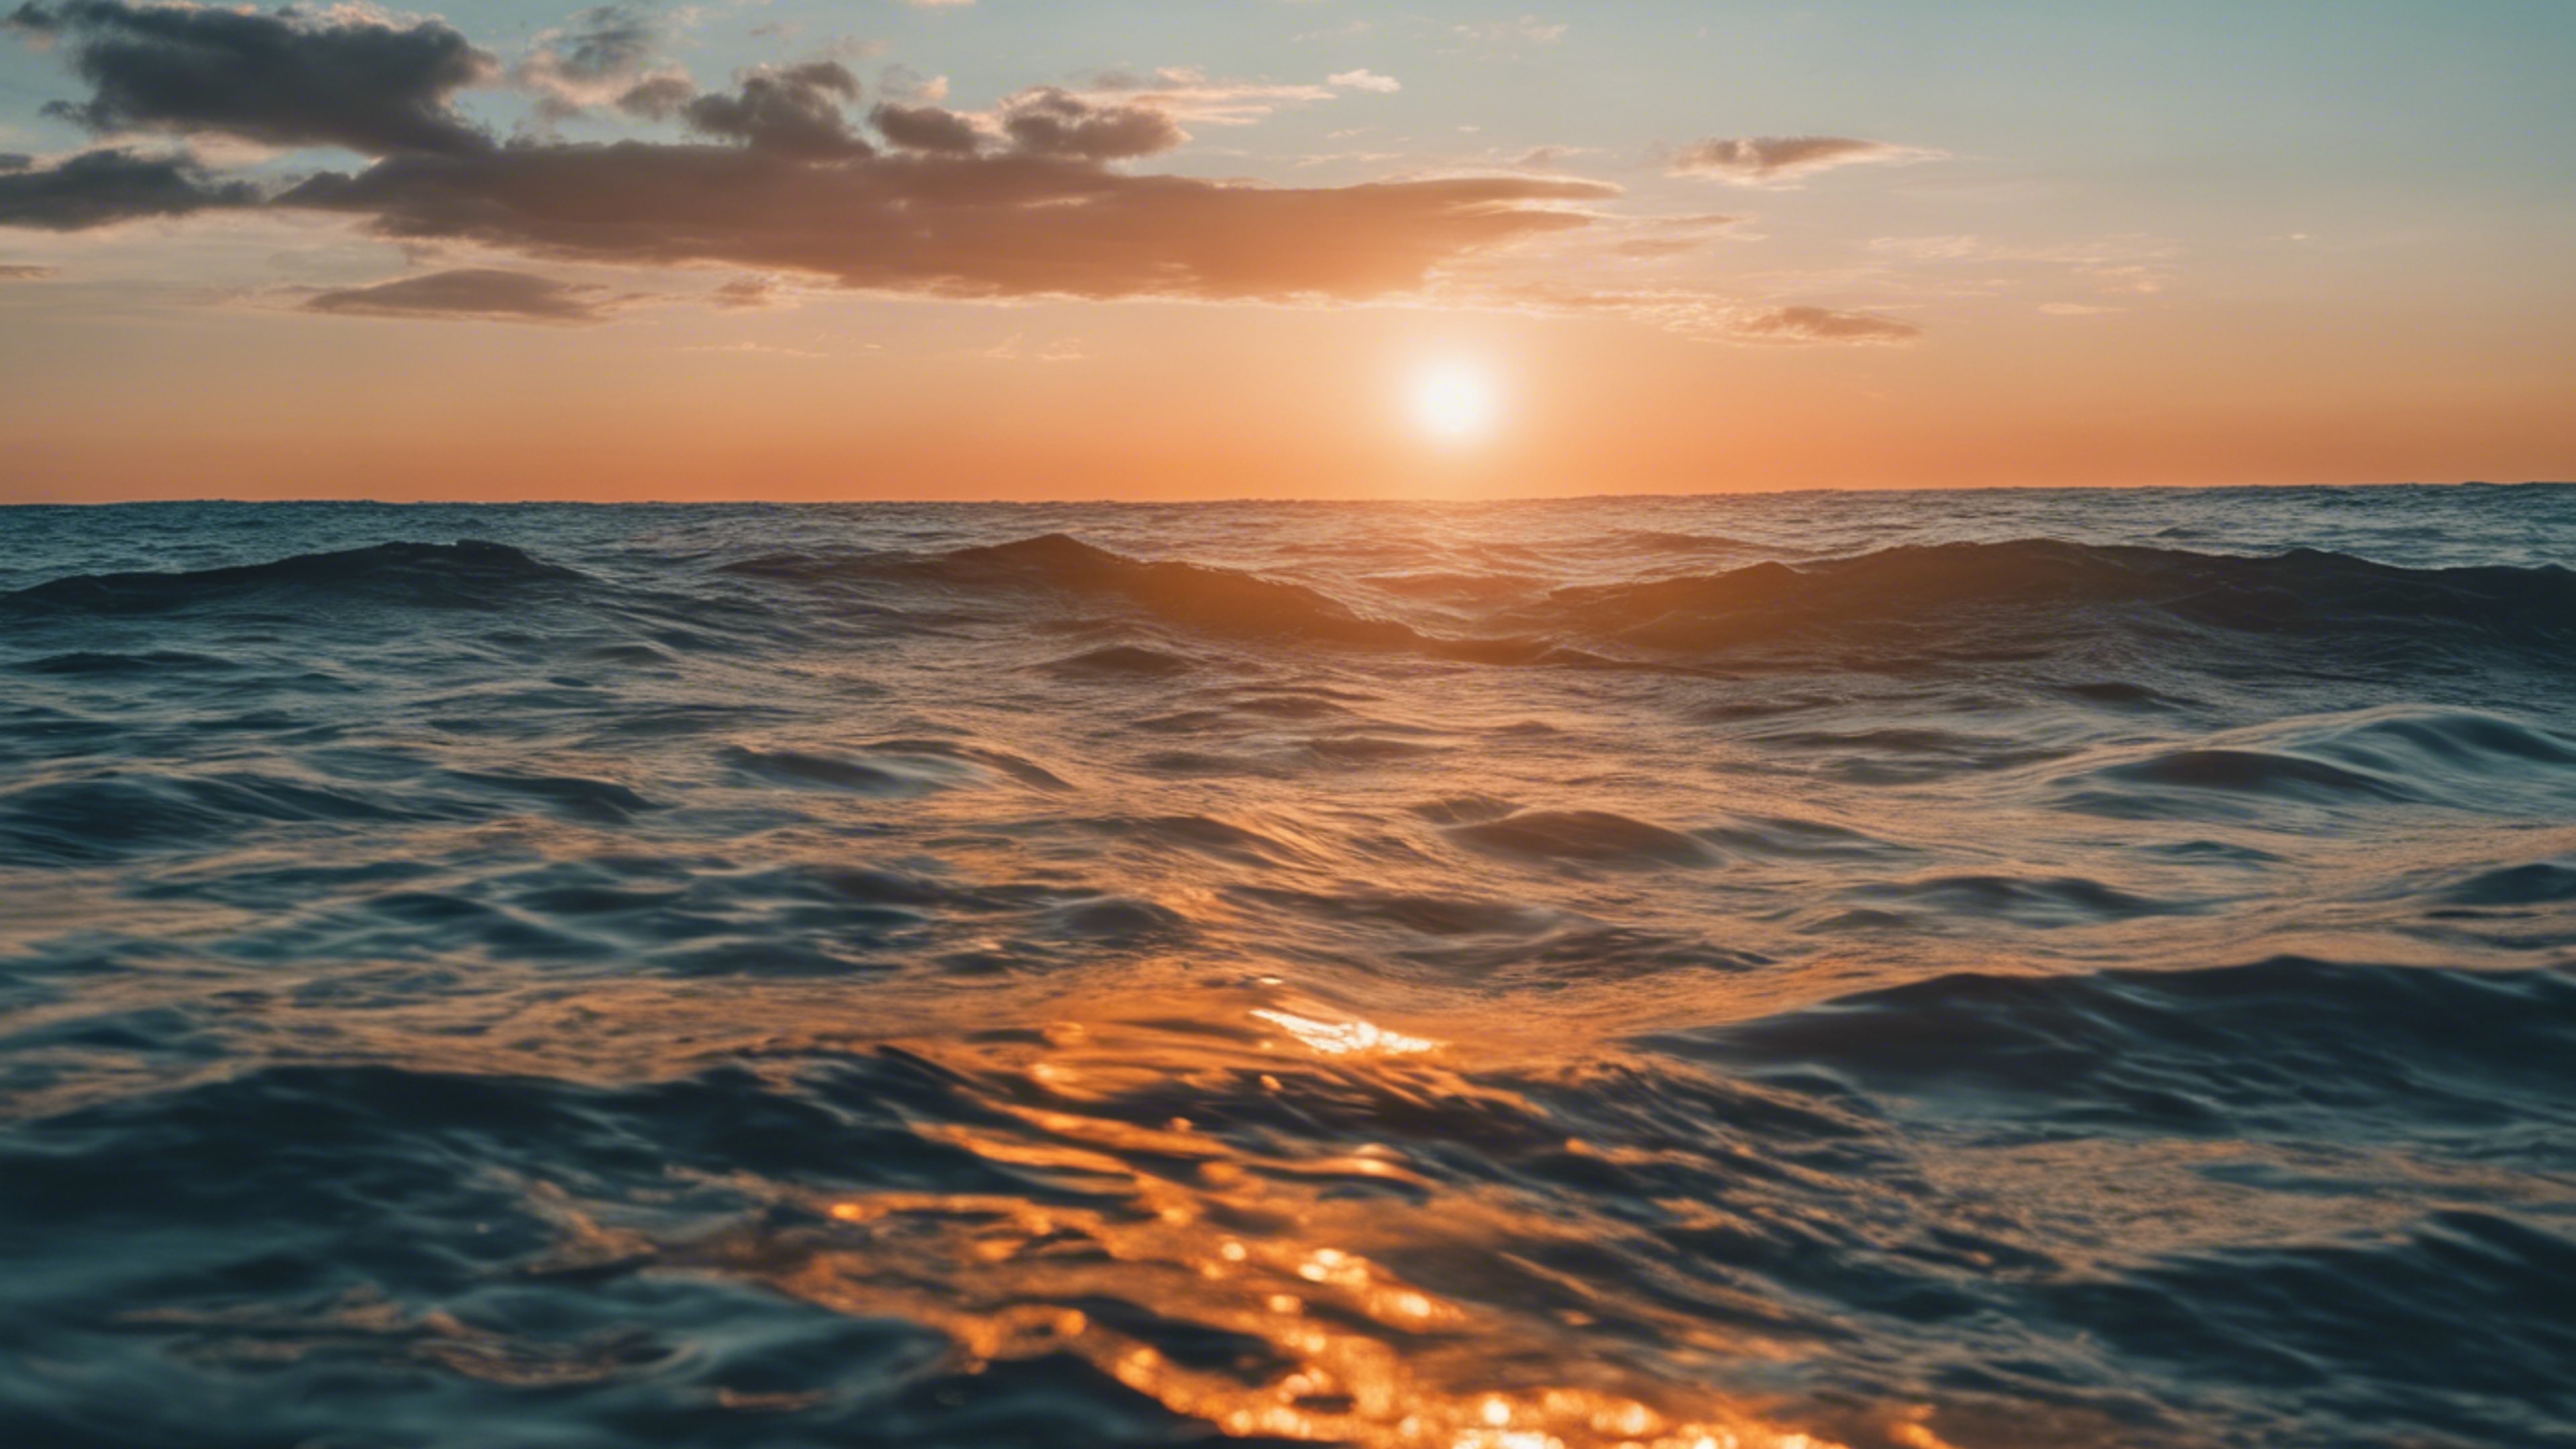 A sunset scene with orange sun setting in the cool blue ocean. Tapet[7965154be6e2421b8d94]